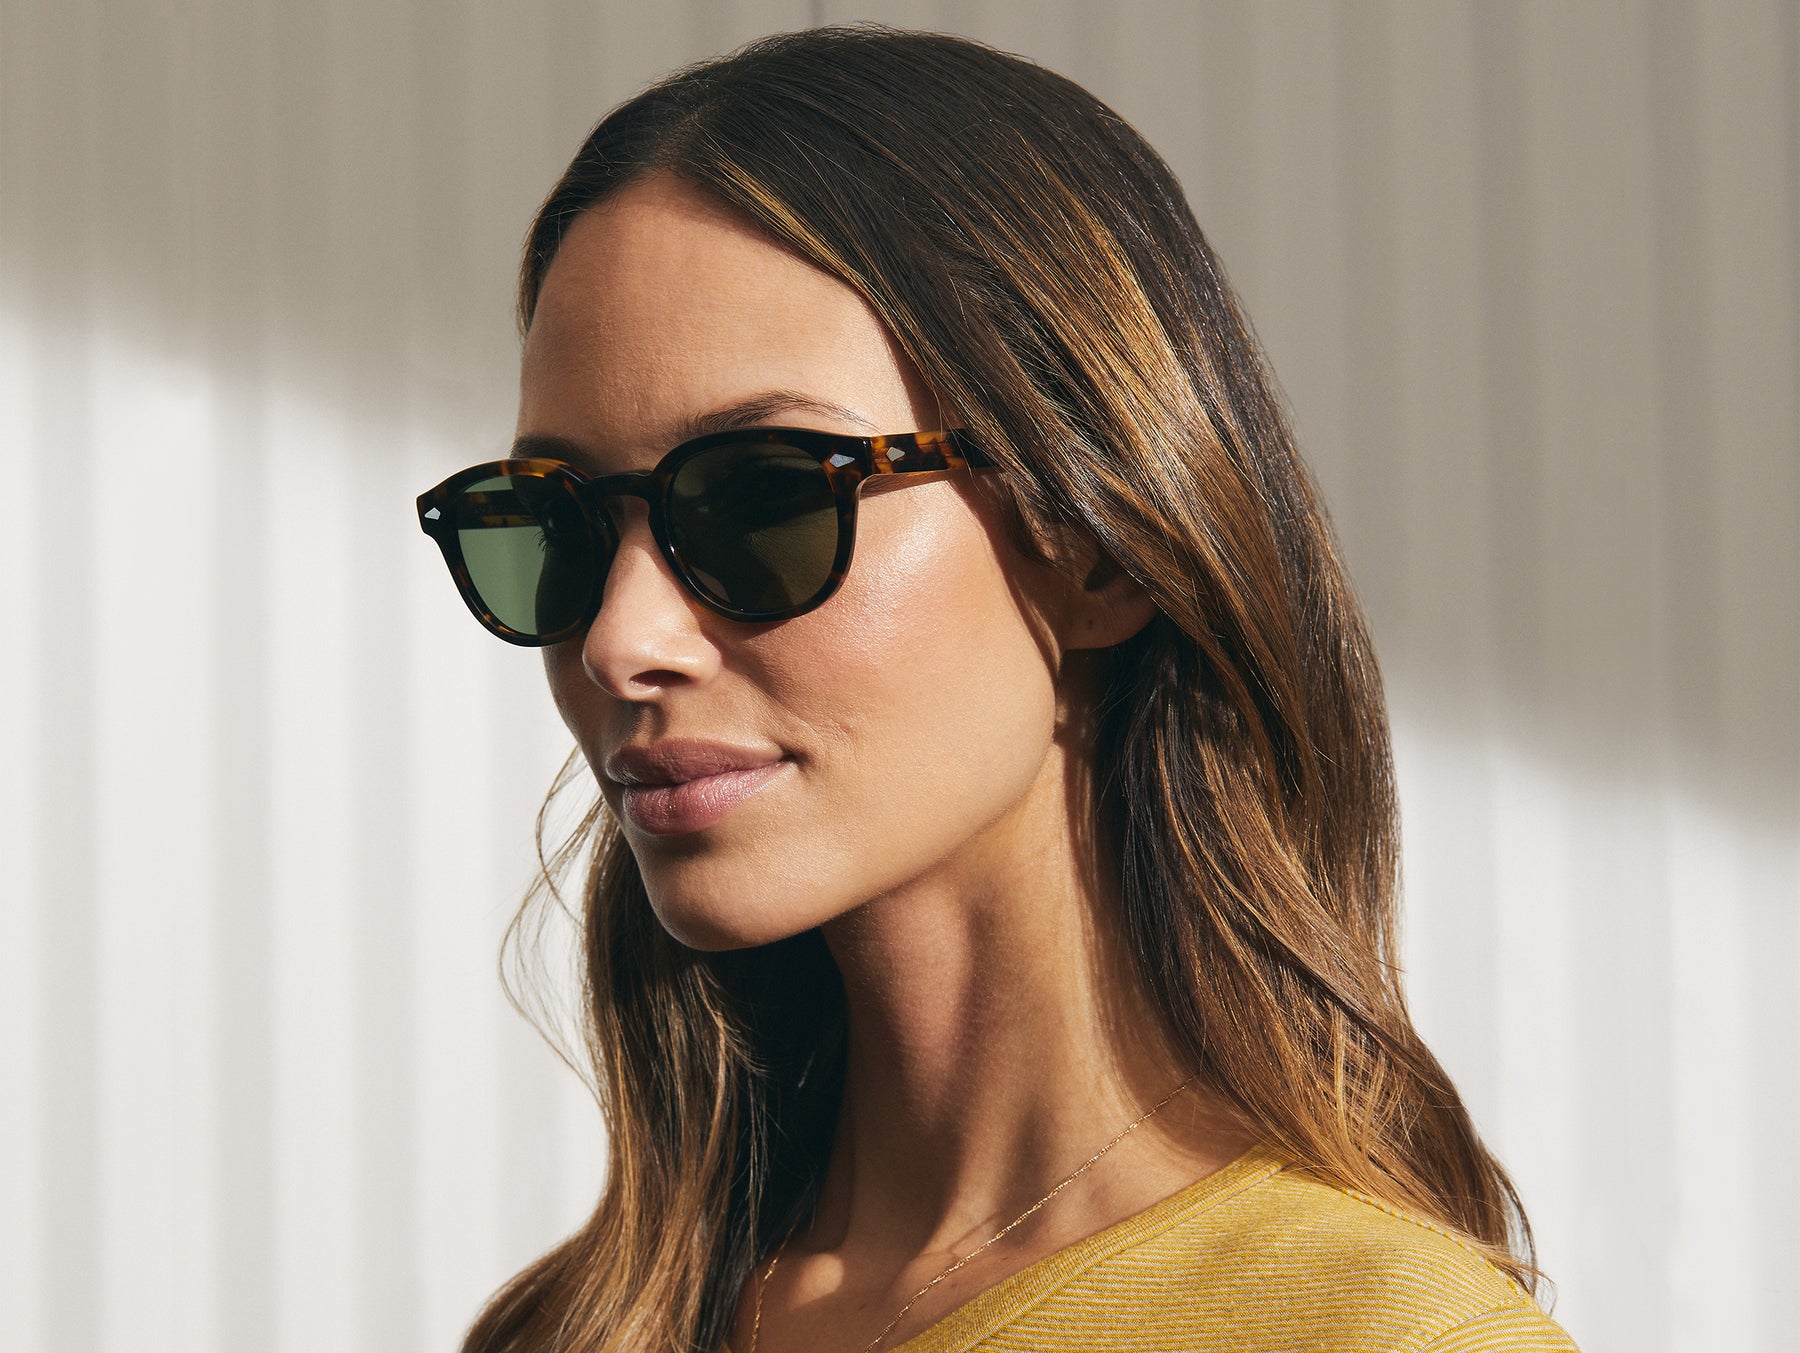 Model is wearing The LEMTOSH SUN in Classic Havana in size 49 with G-15 Glass Lenses